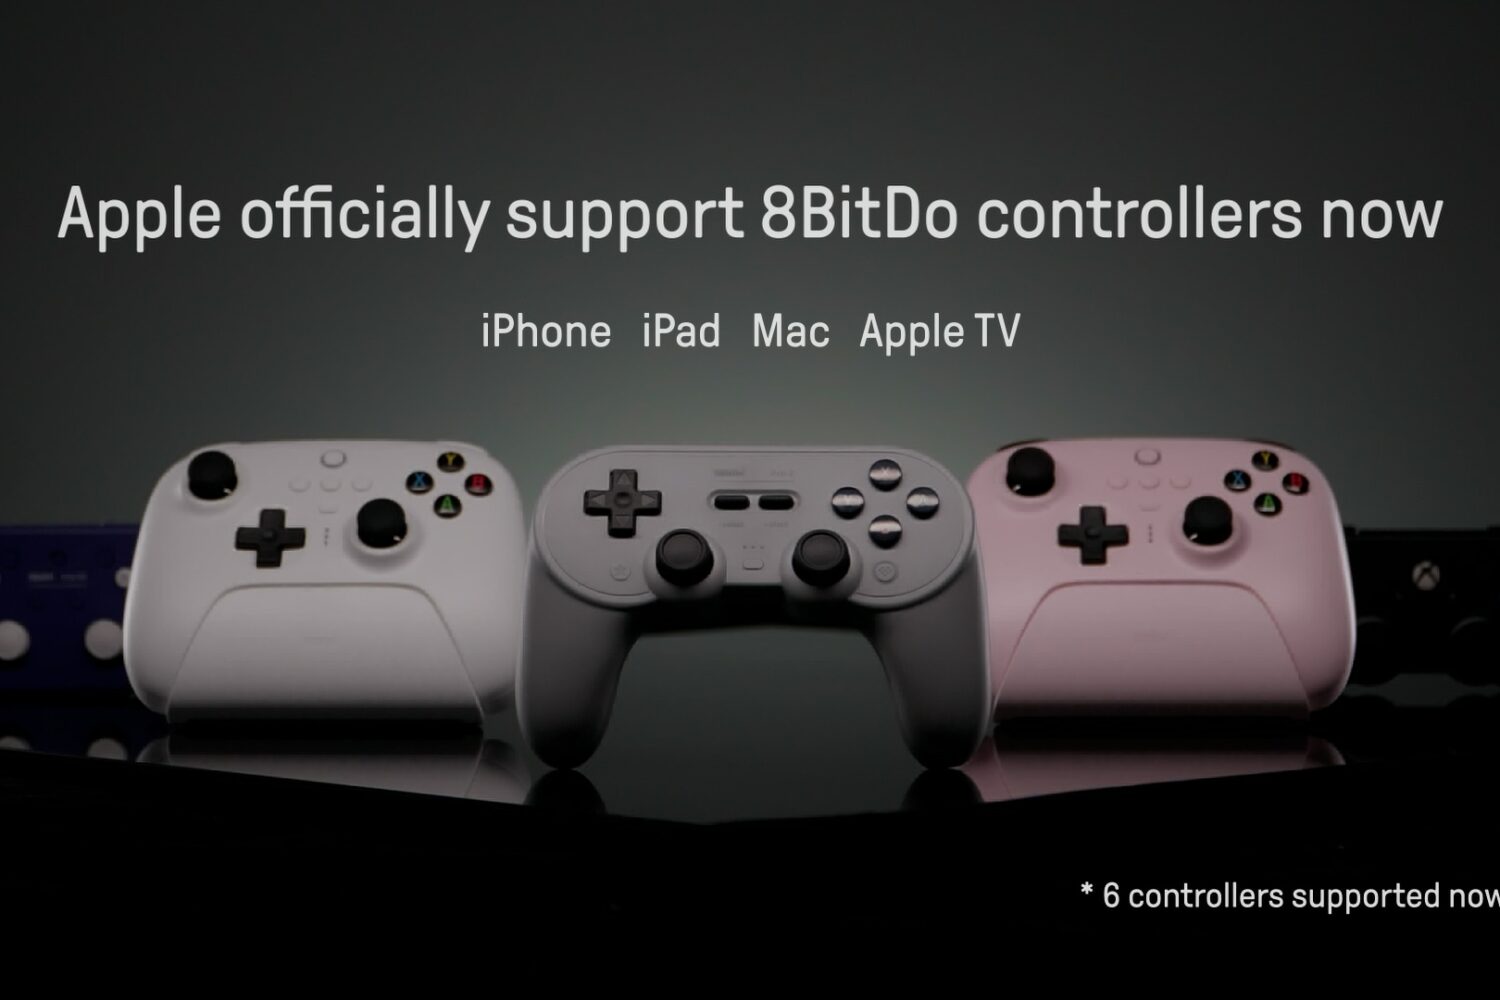 Six gaming controllers from 8BitDo that support Apple devices